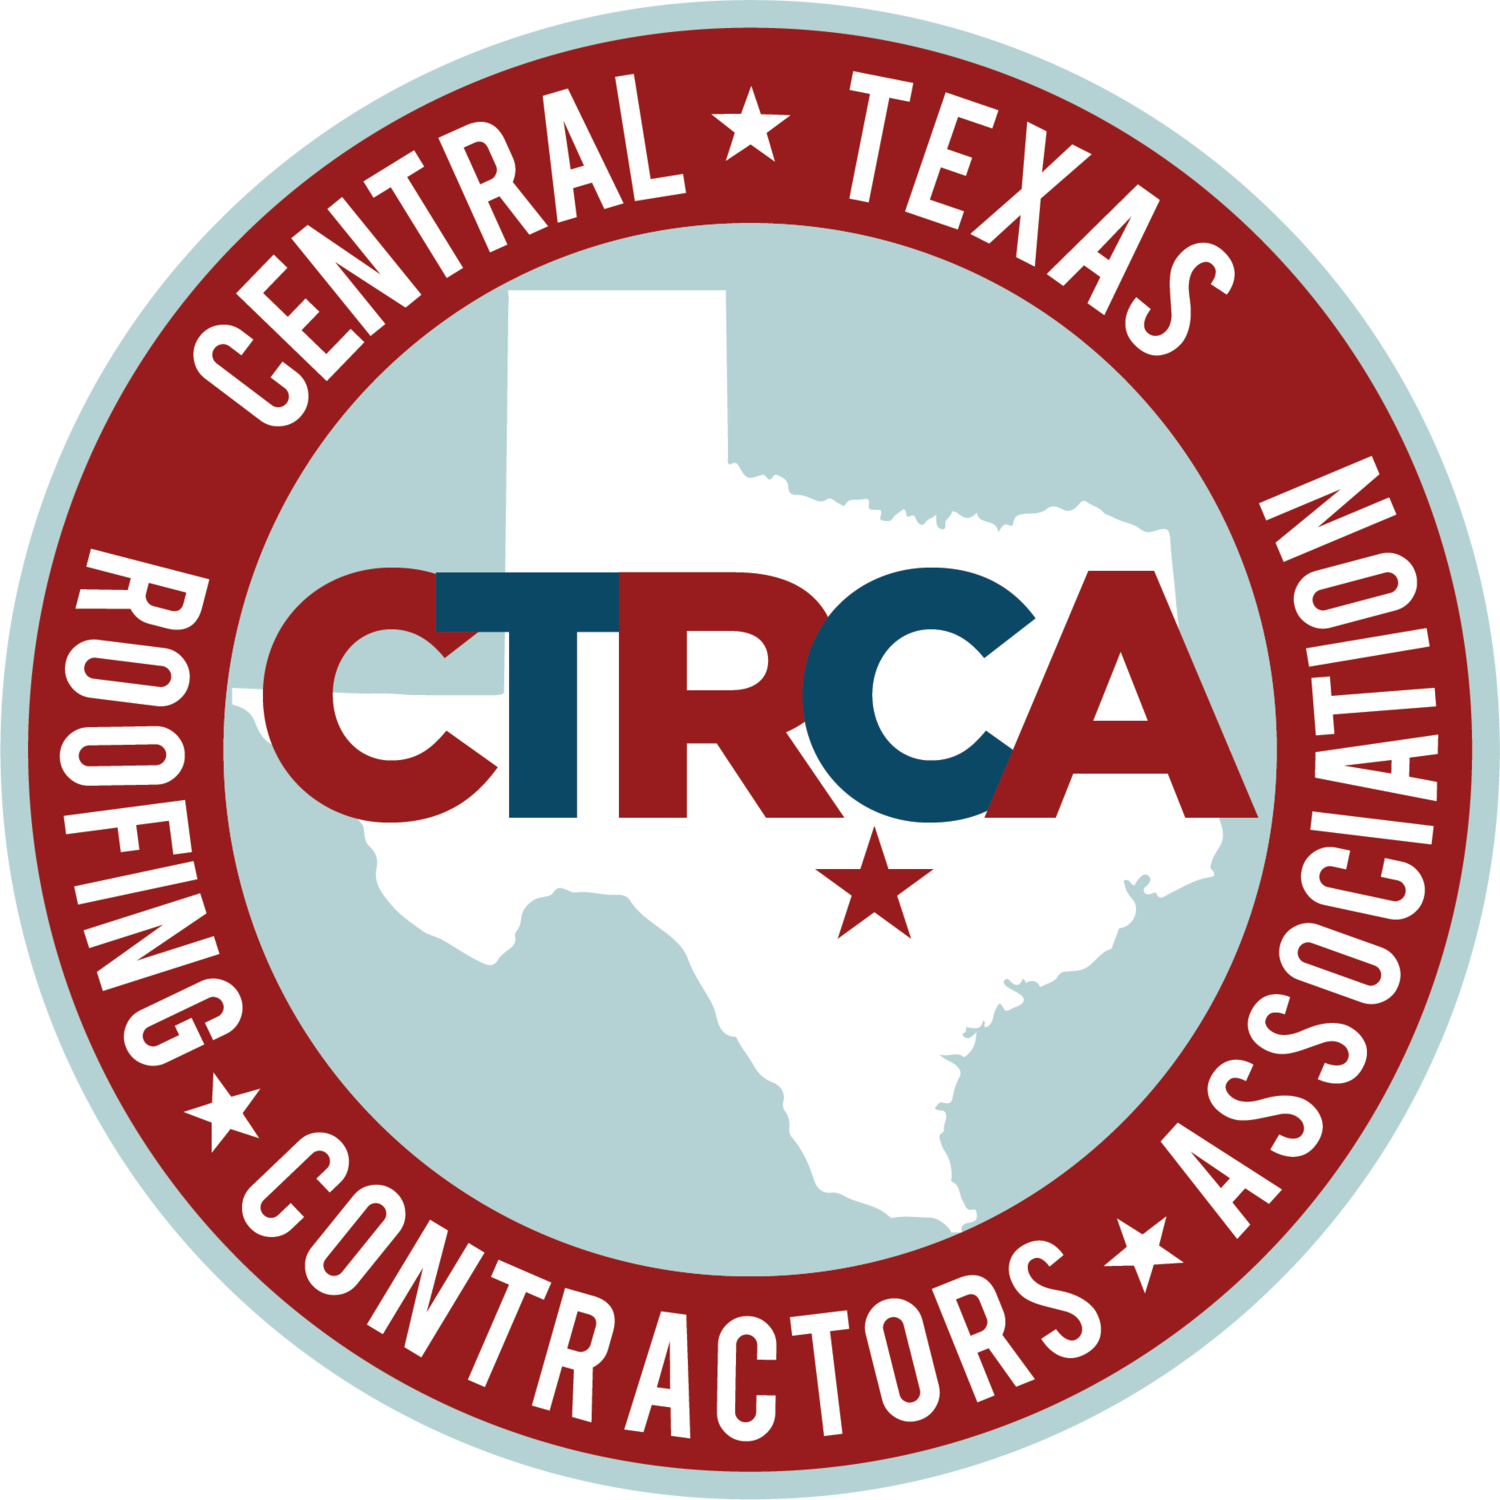 Central Texas Roofing Contractor Association